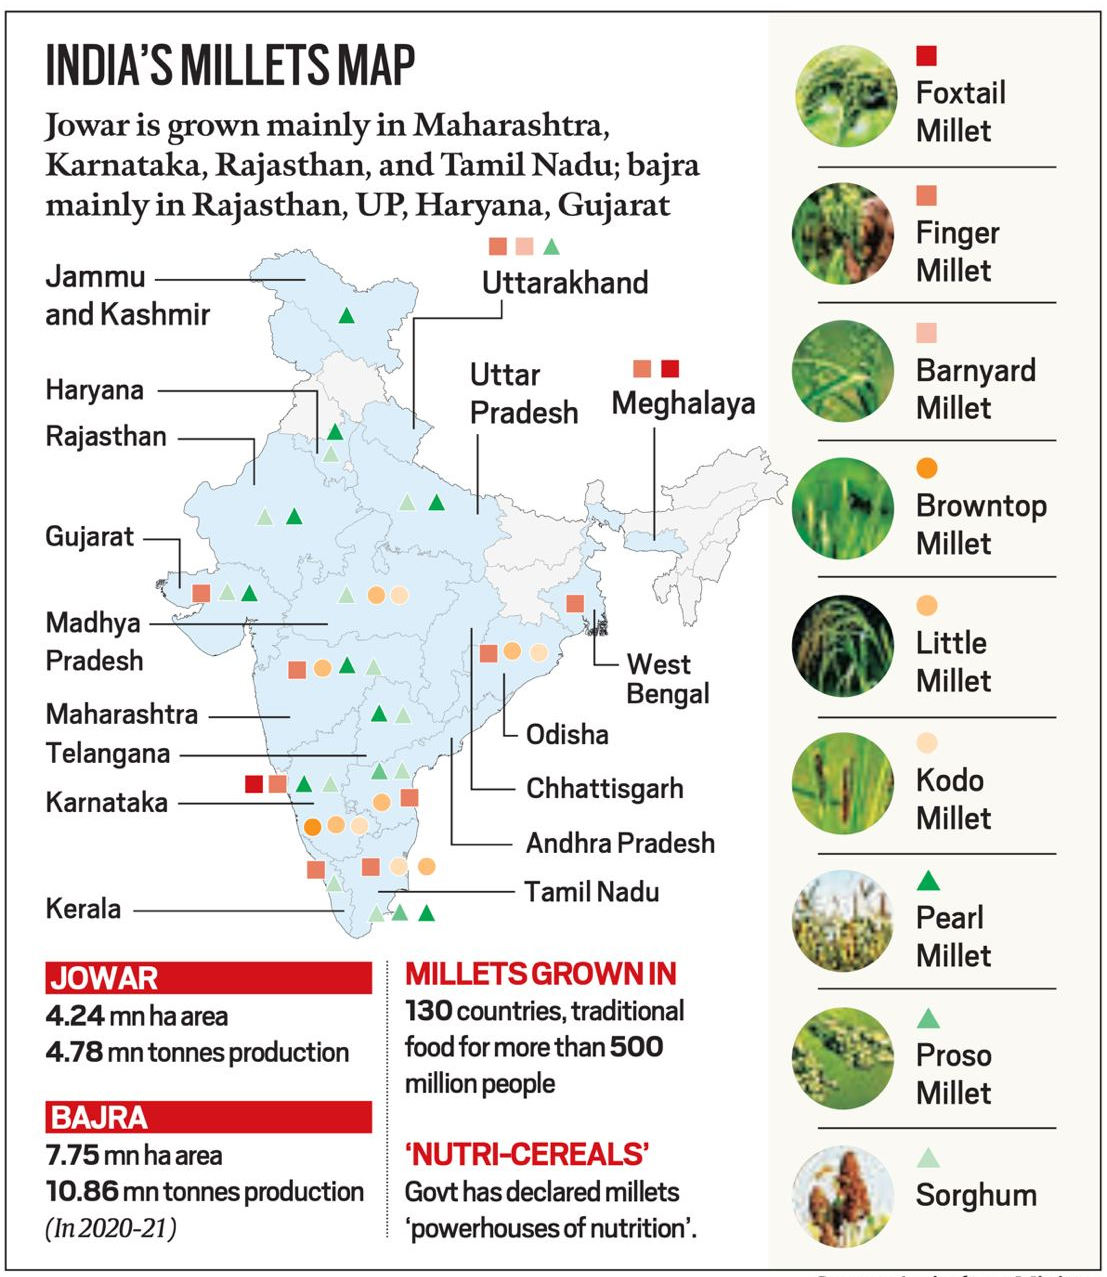 The term millet is used to describe small-grained cereals like sorghum (jowar), pearl millet (bajra), foxtail millet (kangni/ Italian millet), little millet (kutki), kodo millet, finger millet (ragi/ mandua), proso millet (cheena/ common millet), barnyard millet (sawa/ sanwa/ jhangora), and brown top millet (korale).  Millets were among the first crops to be domesticated. There is evidence for consumption of millets in the Indus-Sarasvati civilisation (3,300 to 1300 BCE). Several varieties that are now grown around the world were first cultivated in India. West Africa, China, and Japan are also home to indigenous varieties of the crop.  Millets are now grown in more than 130 countries, and are the traditional food for more than half a billion people in Asia and Africa. Globally, sorghum (jowar) is the biggest millet crop. The major producers of jowar are the United States, China, Australia, India, Argentina, Nigeria, and Sudan. Bajra is another major millet crop; India and some African countries are major producers.  In India, millets are mainly a kharif crop. During 2018-19, three millet crops — bajra (3.67%), jowar (2.13%), and ragi (0.48%) — accounted for about 7 per cent of the gross cropped area in the country, Agriculture Ministry data show.